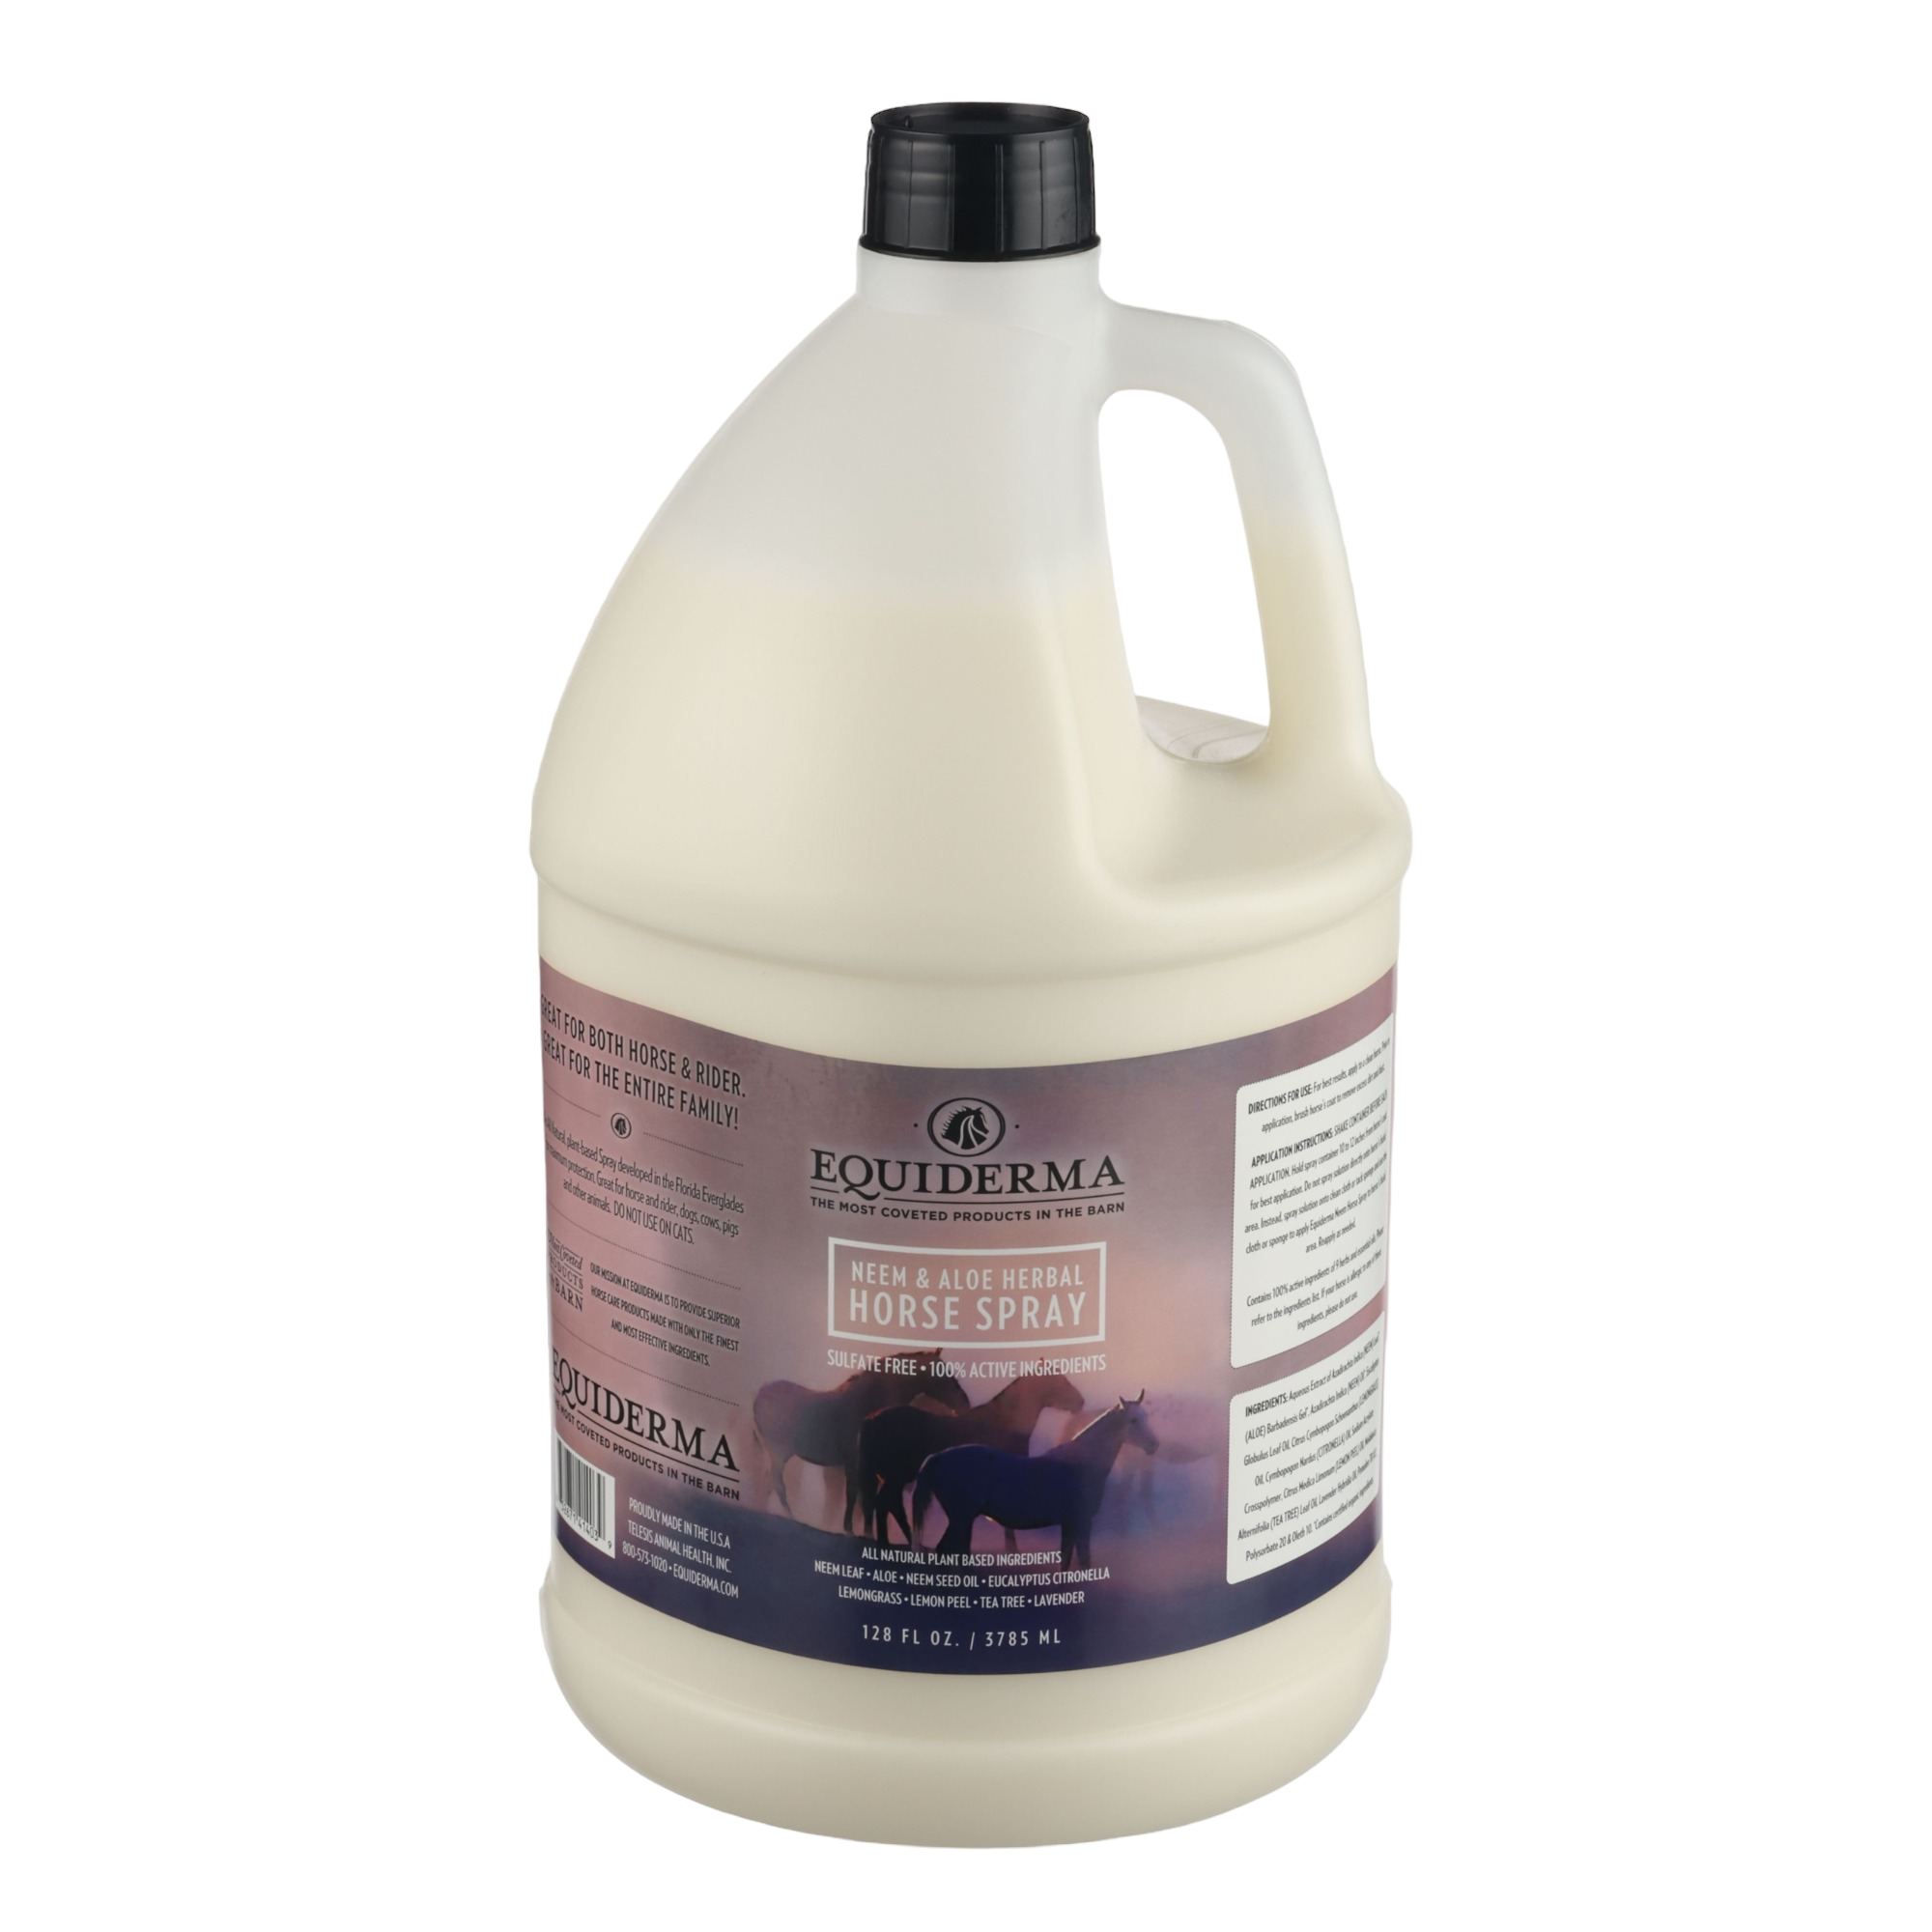 SALE! Buy a Gallon of Horse Spray, Get a Bottle of Neem Oil Free